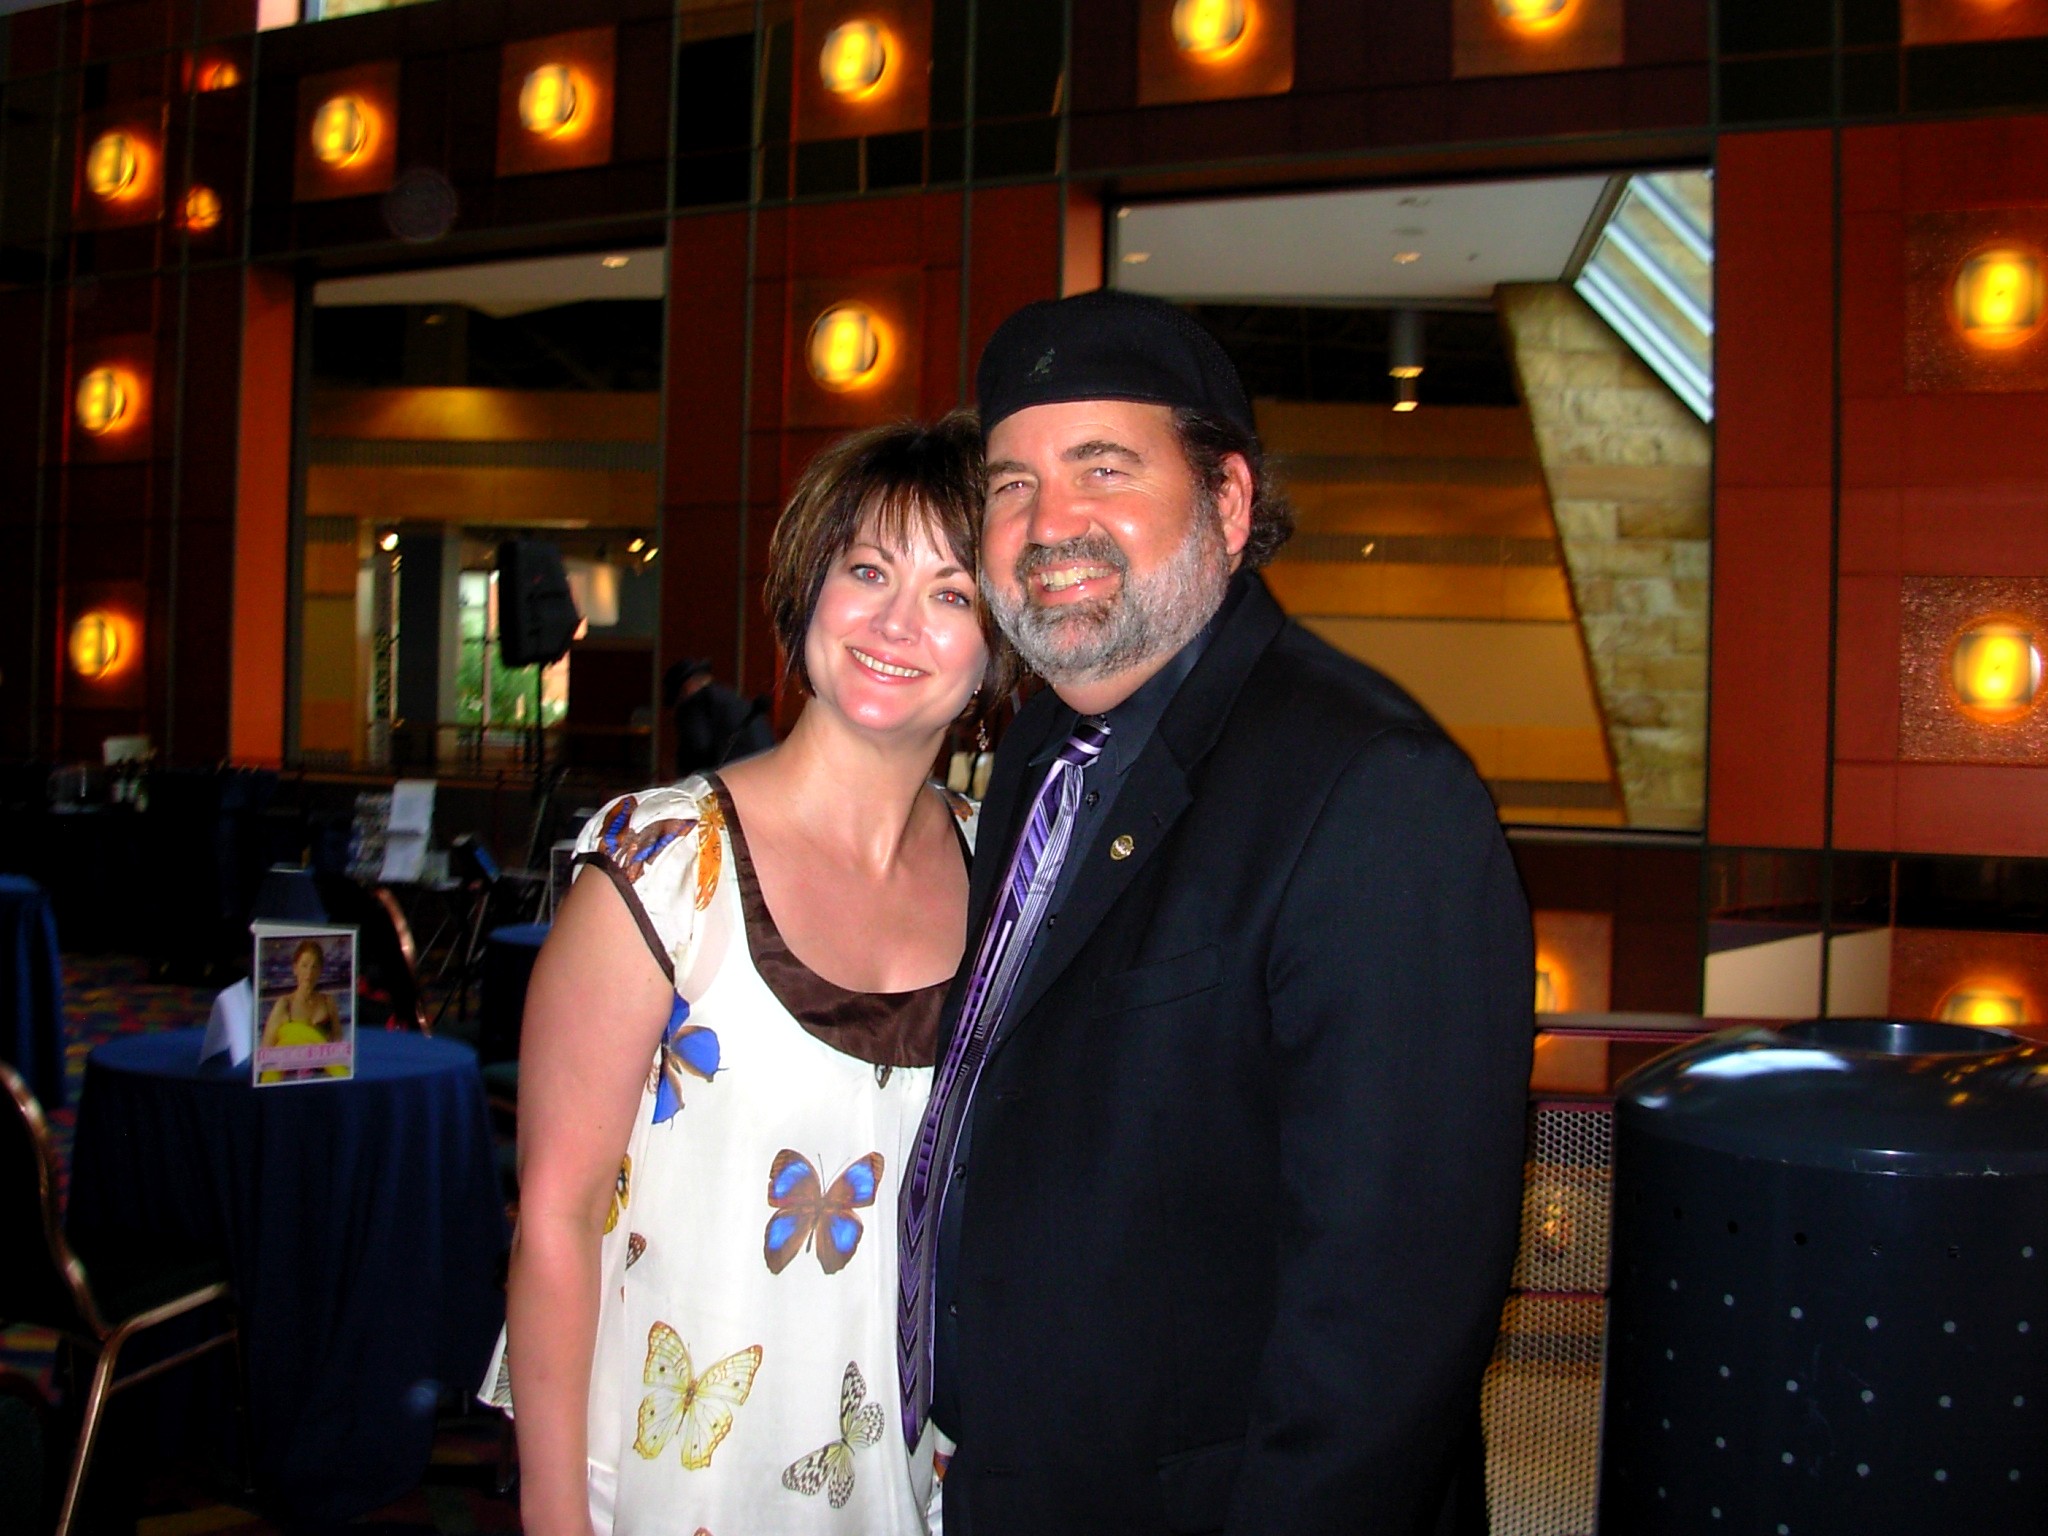 Arthritis Foundation Event Promotor Bernadette Hill with the Wise Guy
